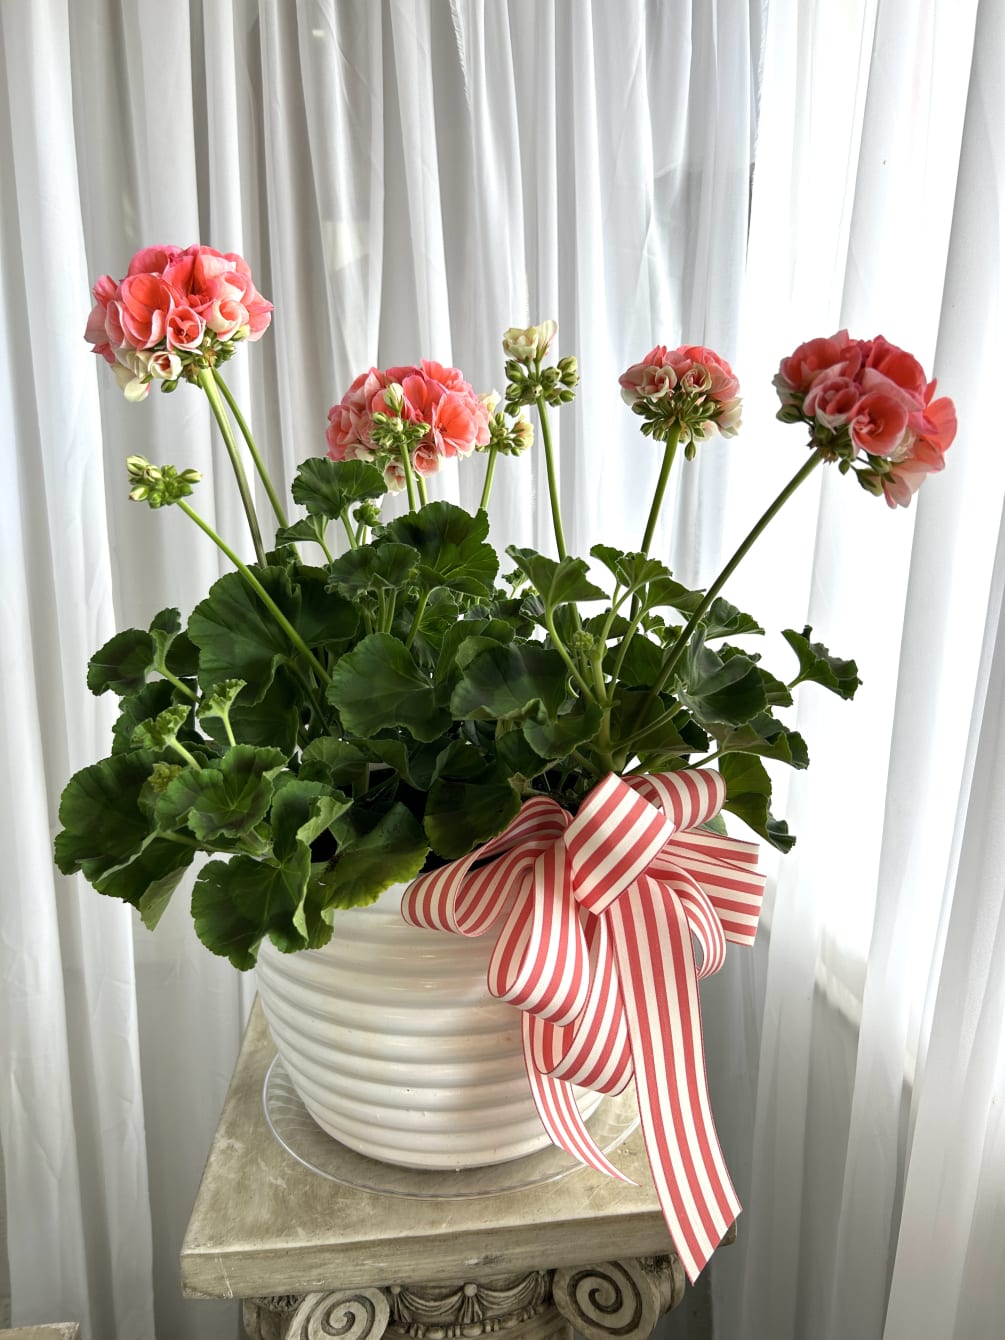 The name says it all!  Colorful, summer-loving geraniums are planted in